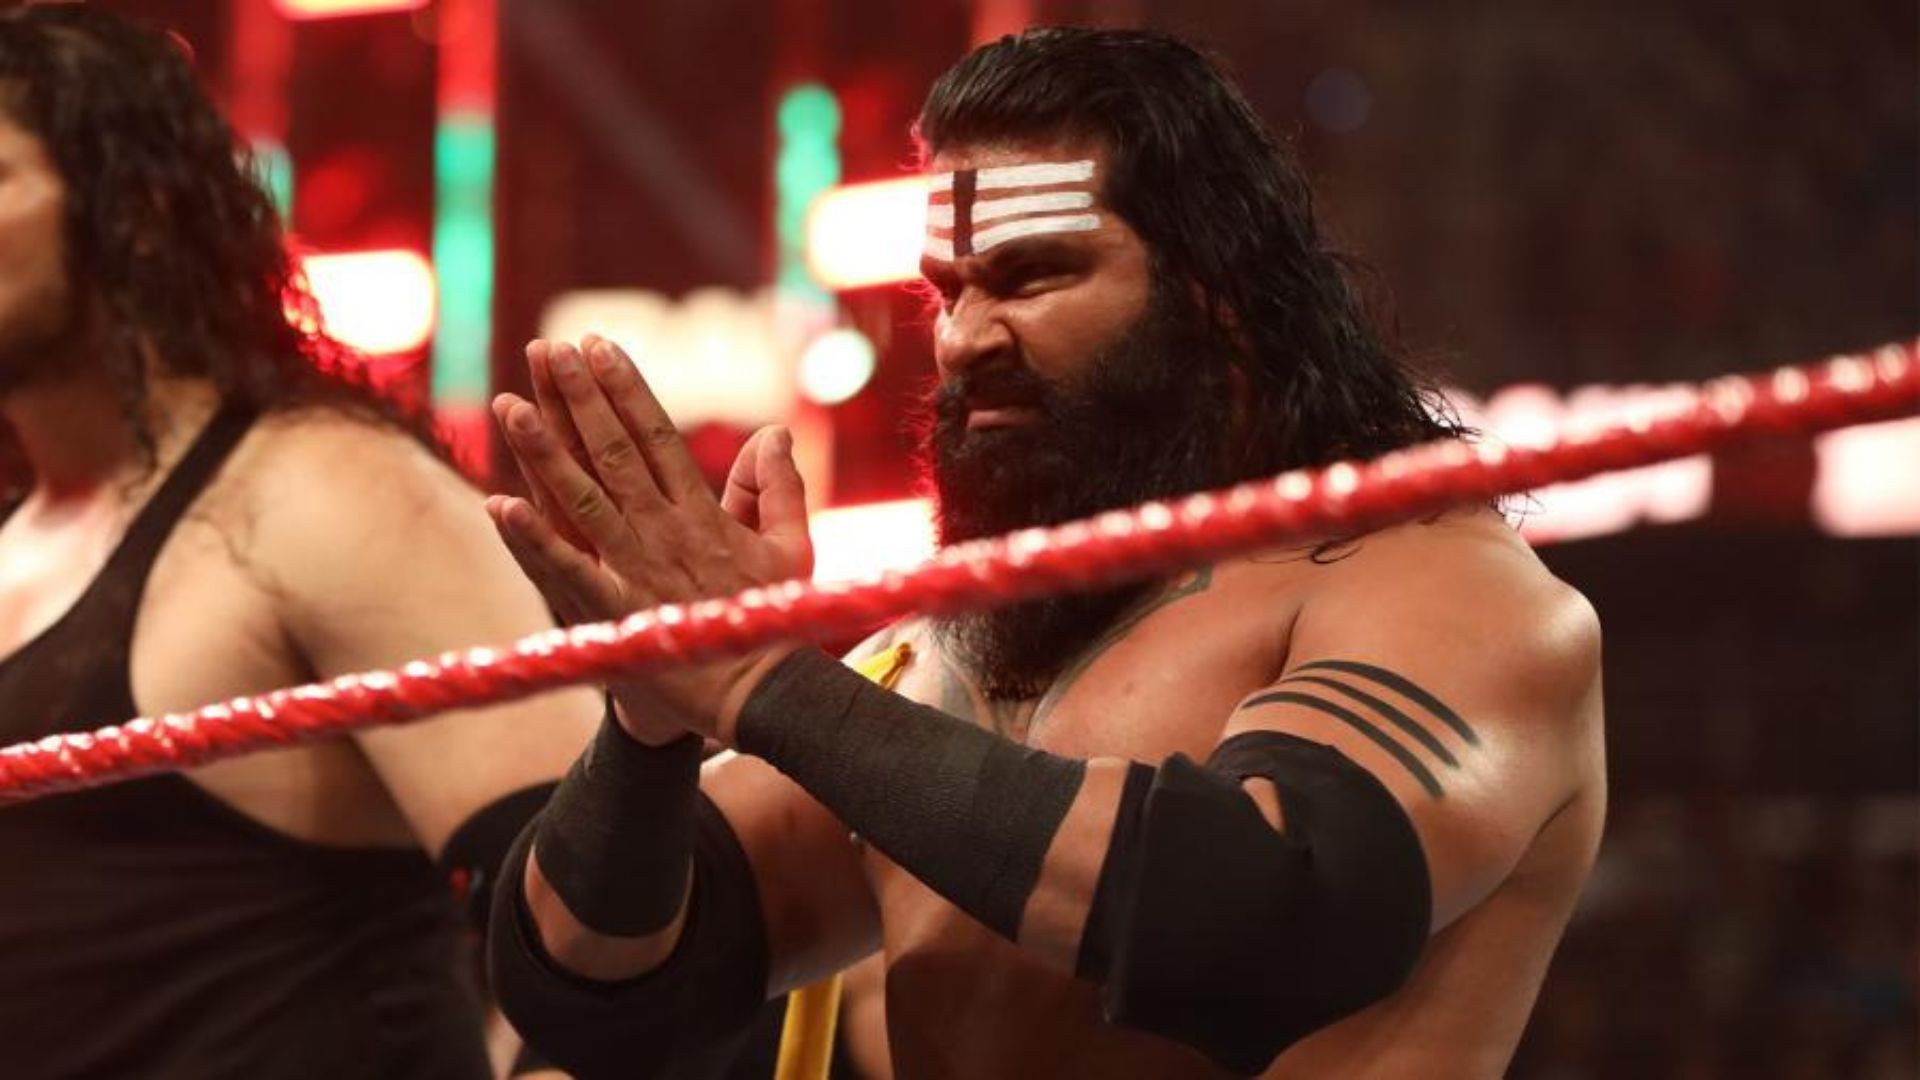 Veer is yet to make his return to WWE despite being hyped up for months